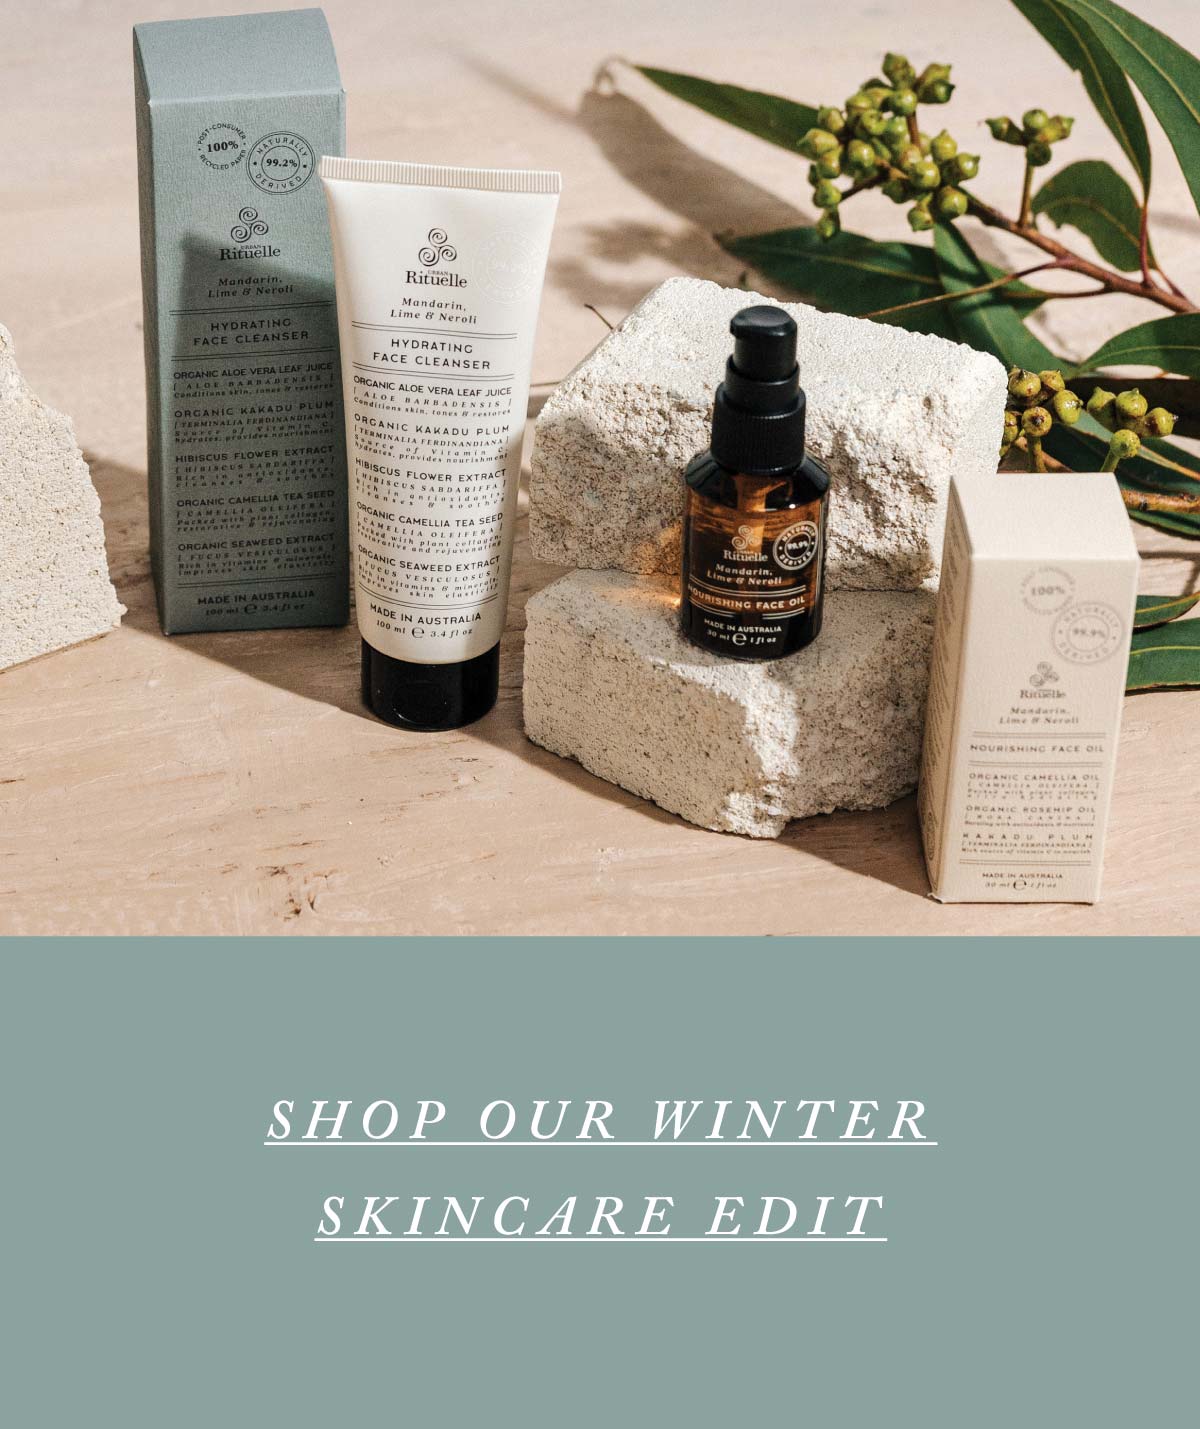 Dry Skin? We Have the Solution. Get glowing this winter.